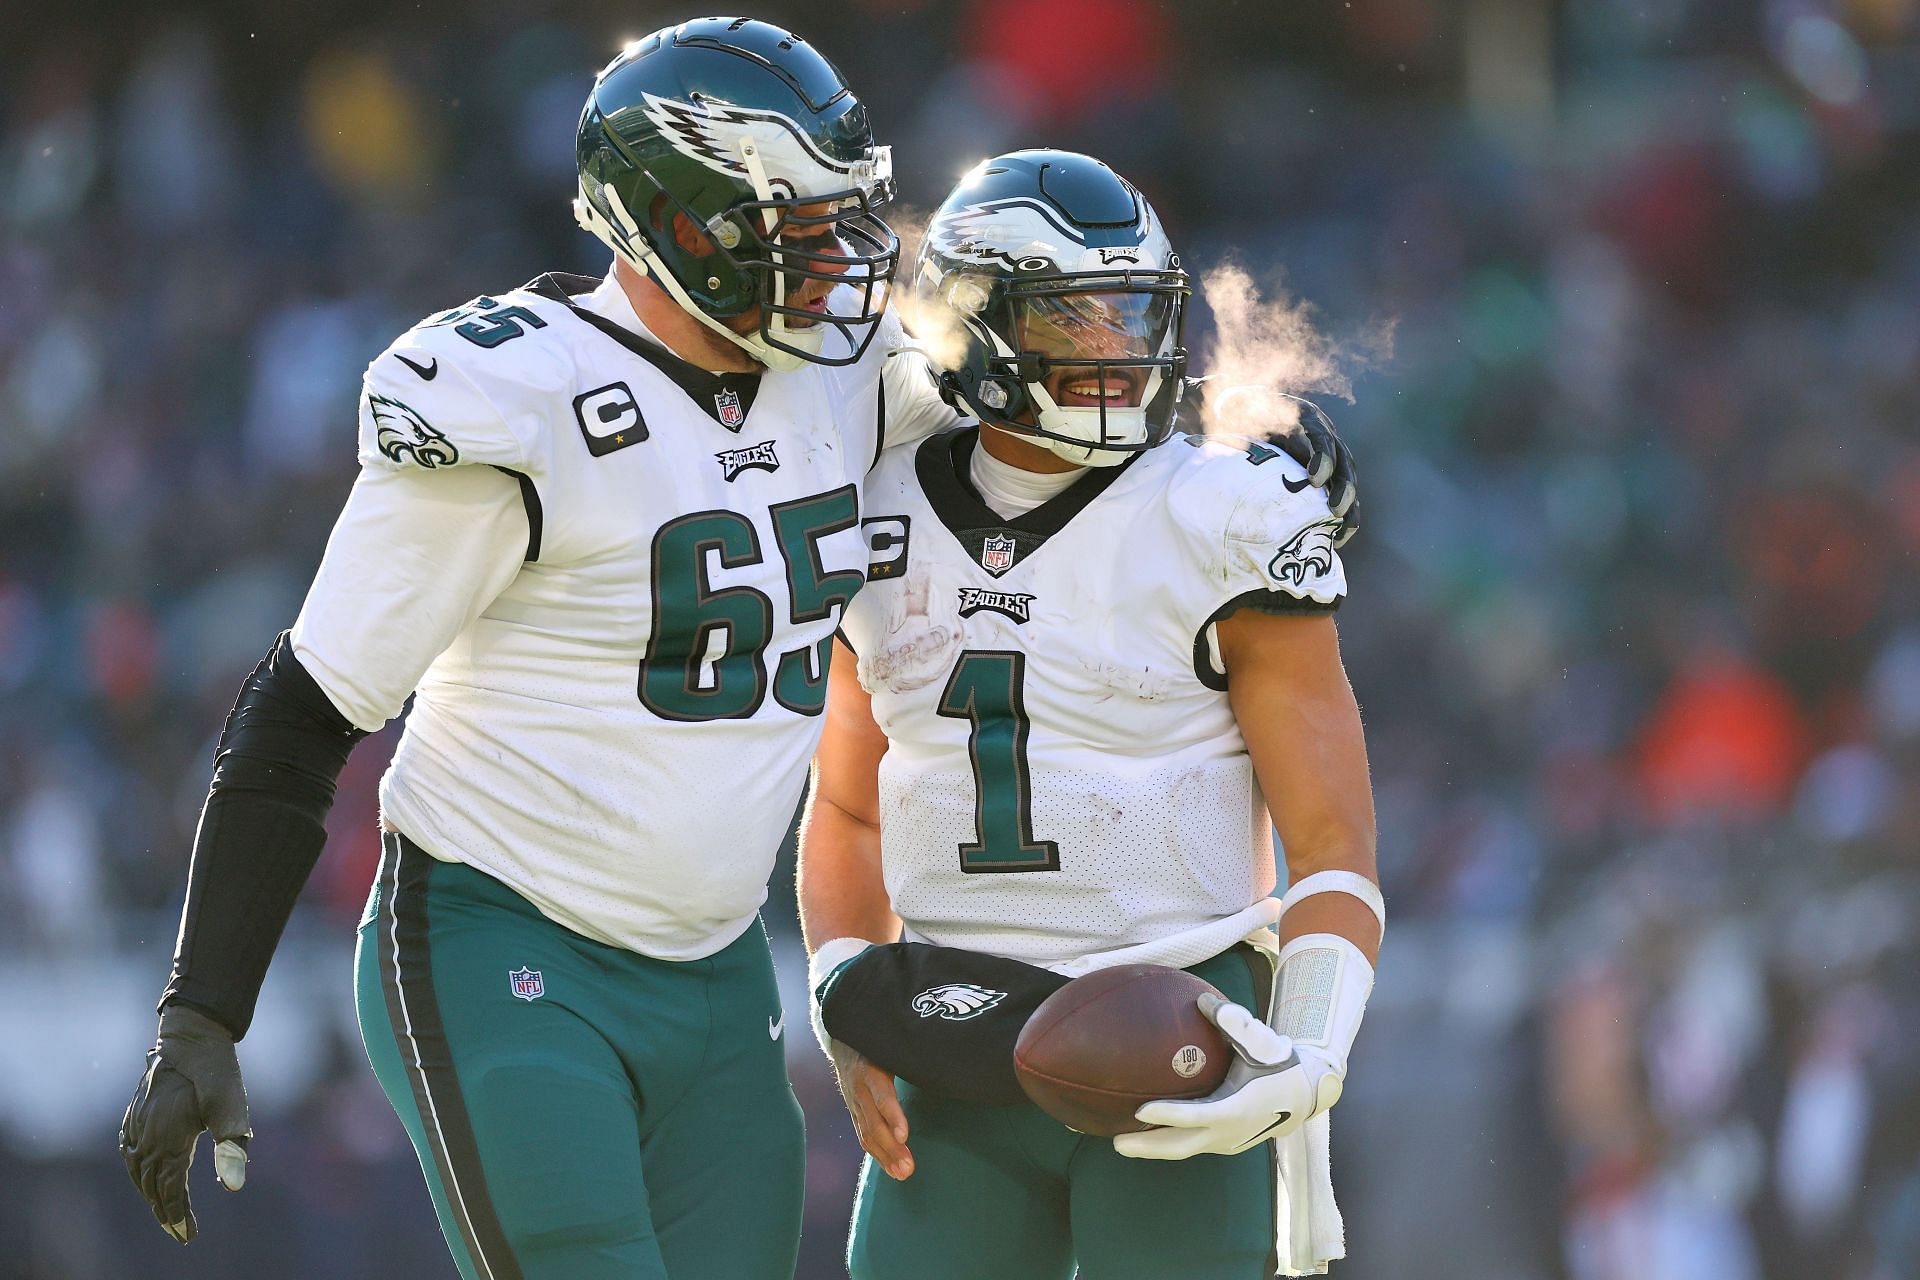 The Philadelphia Eagles have been buoyed by these two